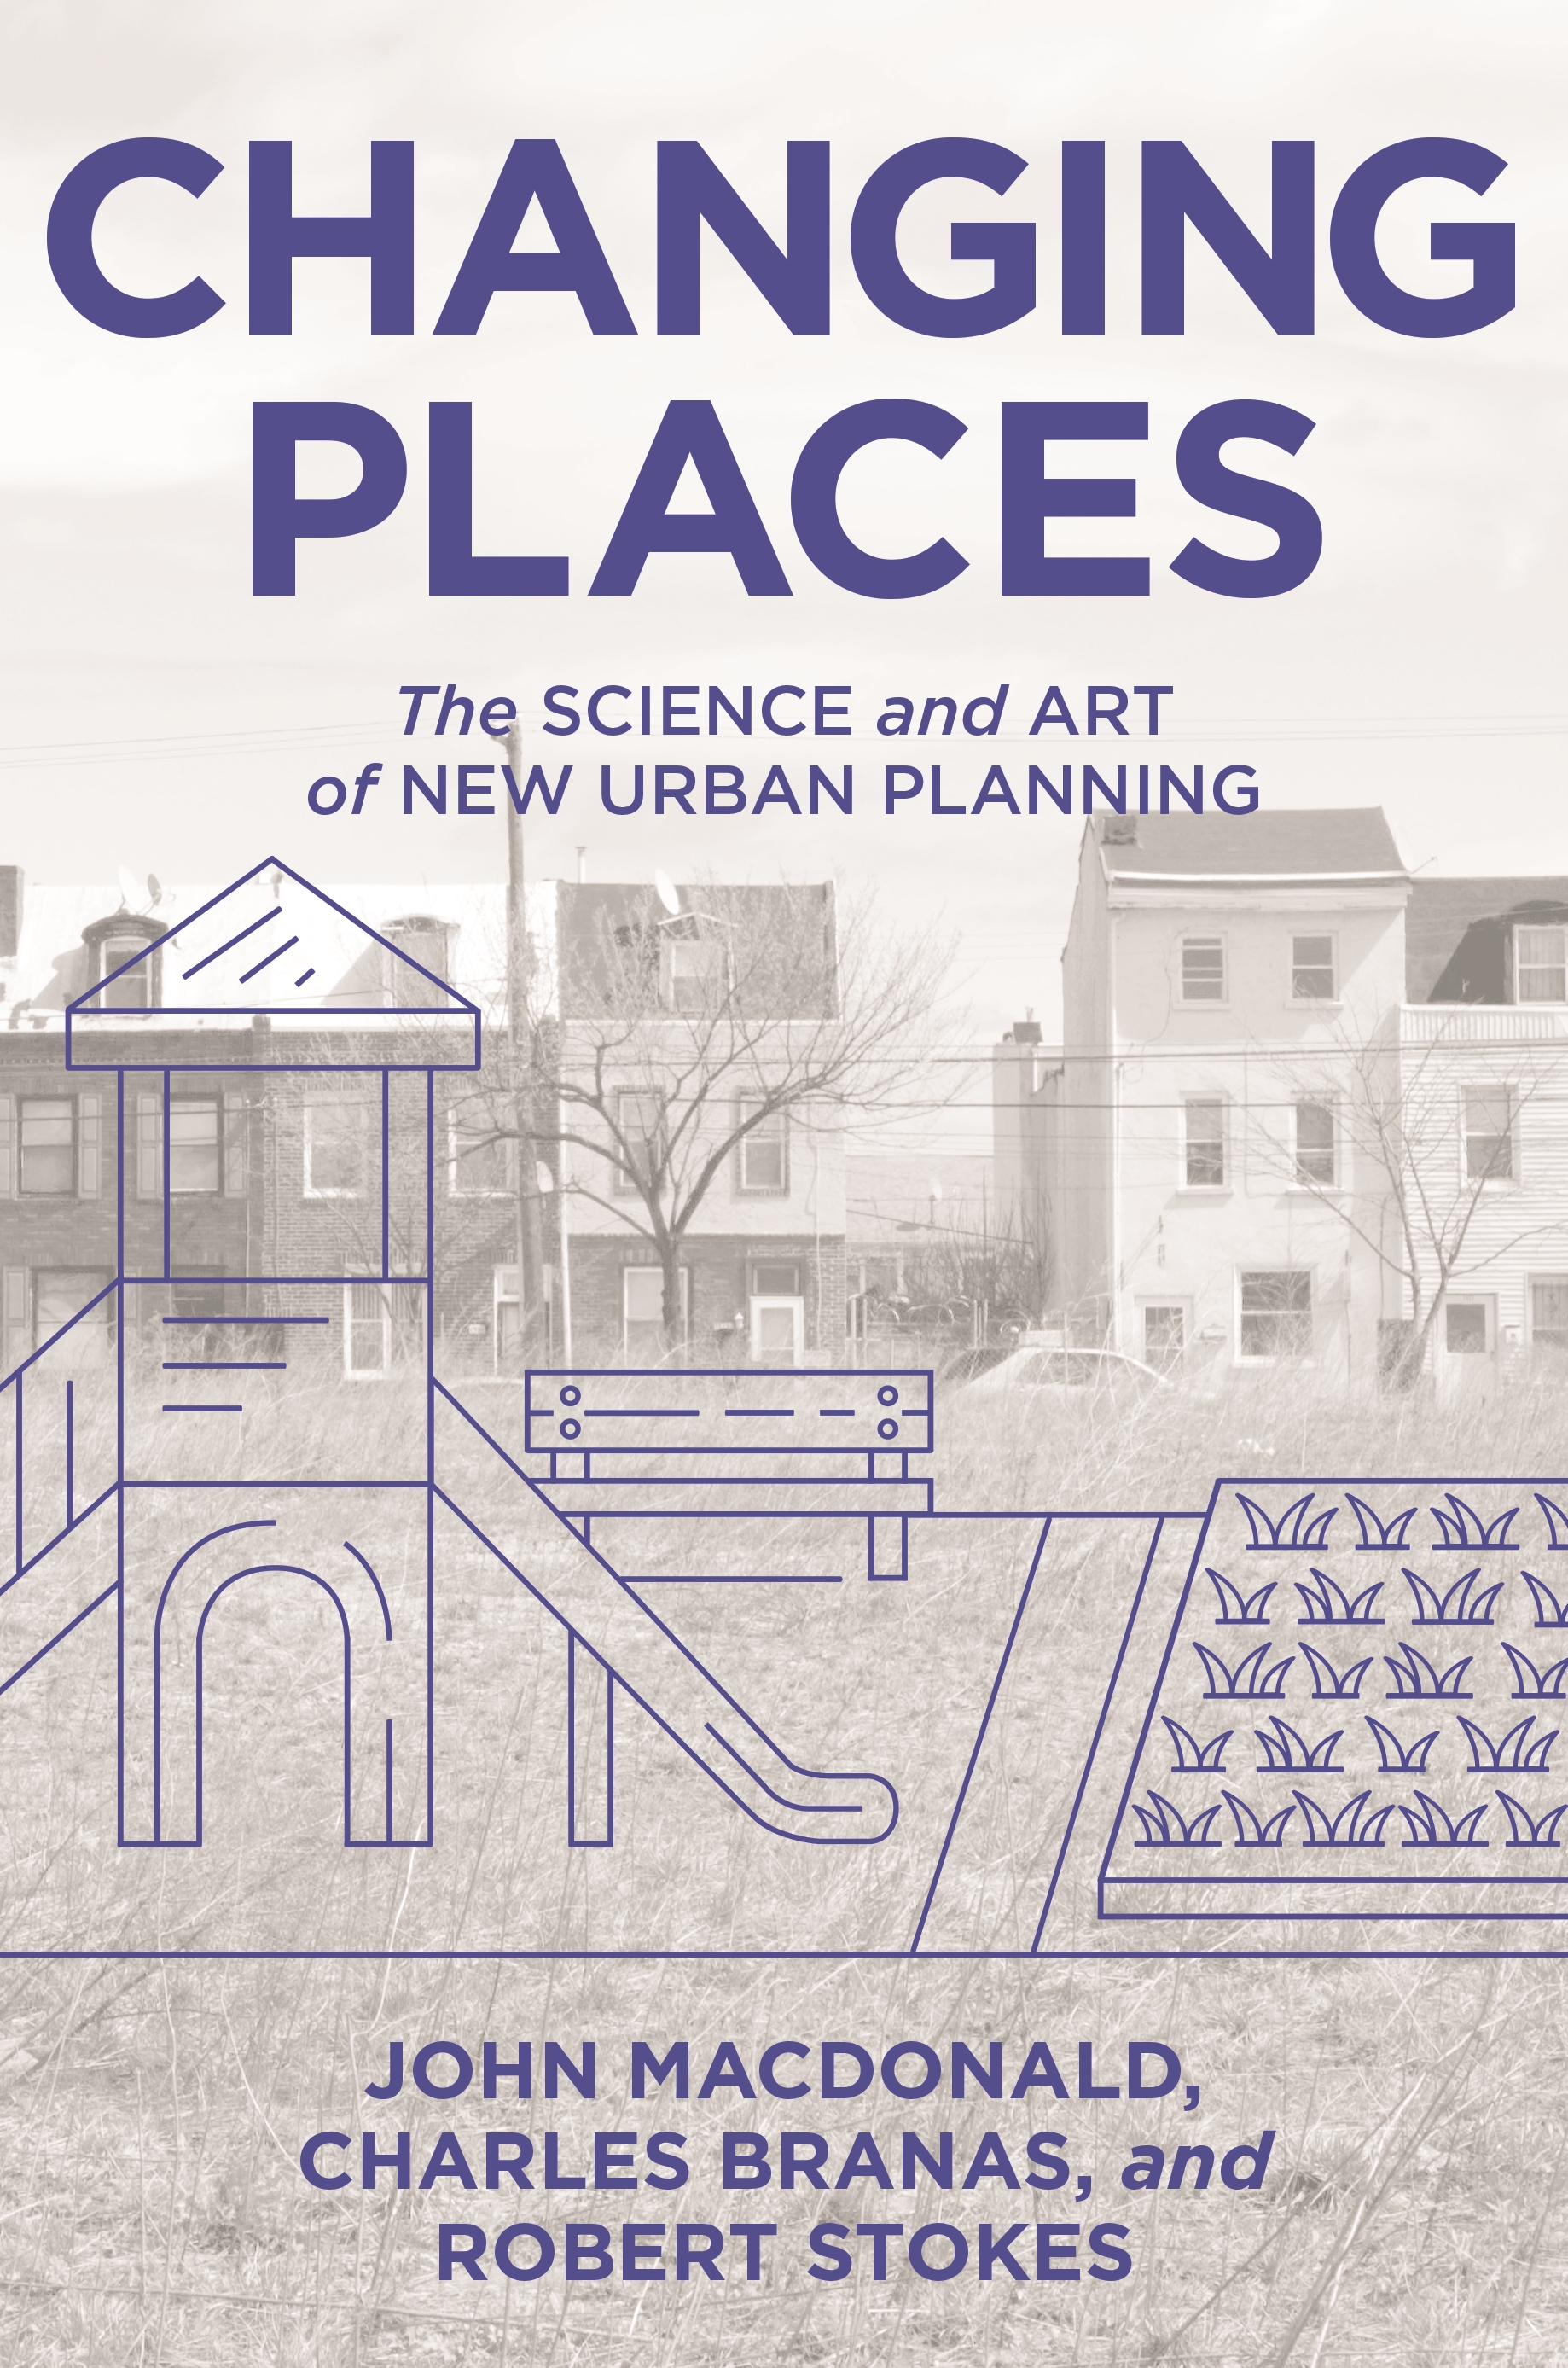 Book cover for the book "Changing Places: The Science and Art of New Urban Planning"